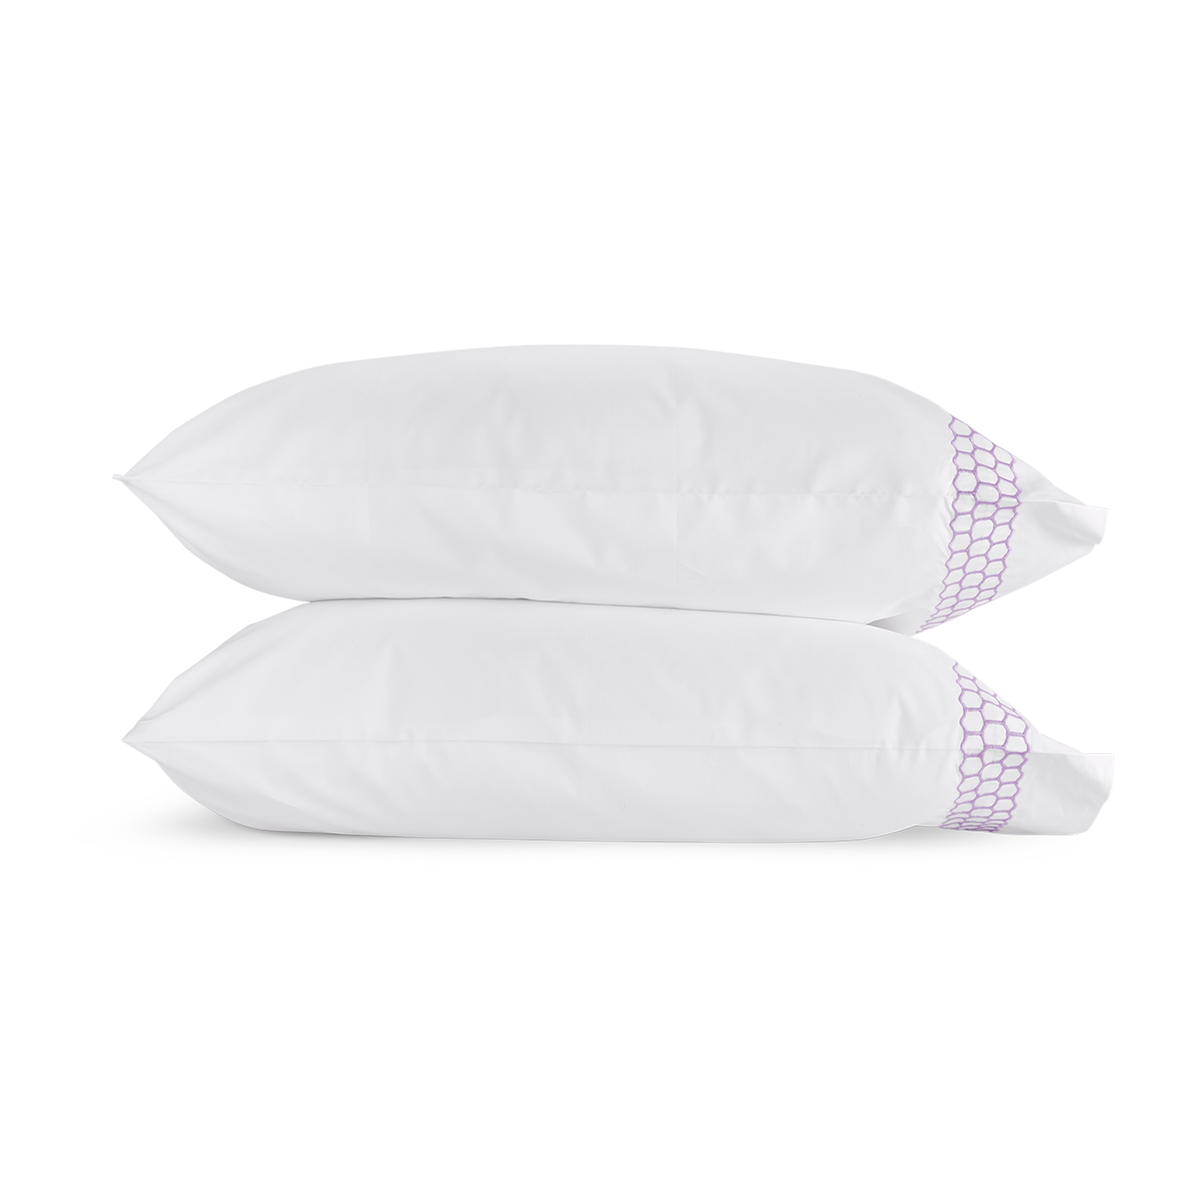 Clear Image of Matouk Liana Bedding Pillowcases in Lavender Color